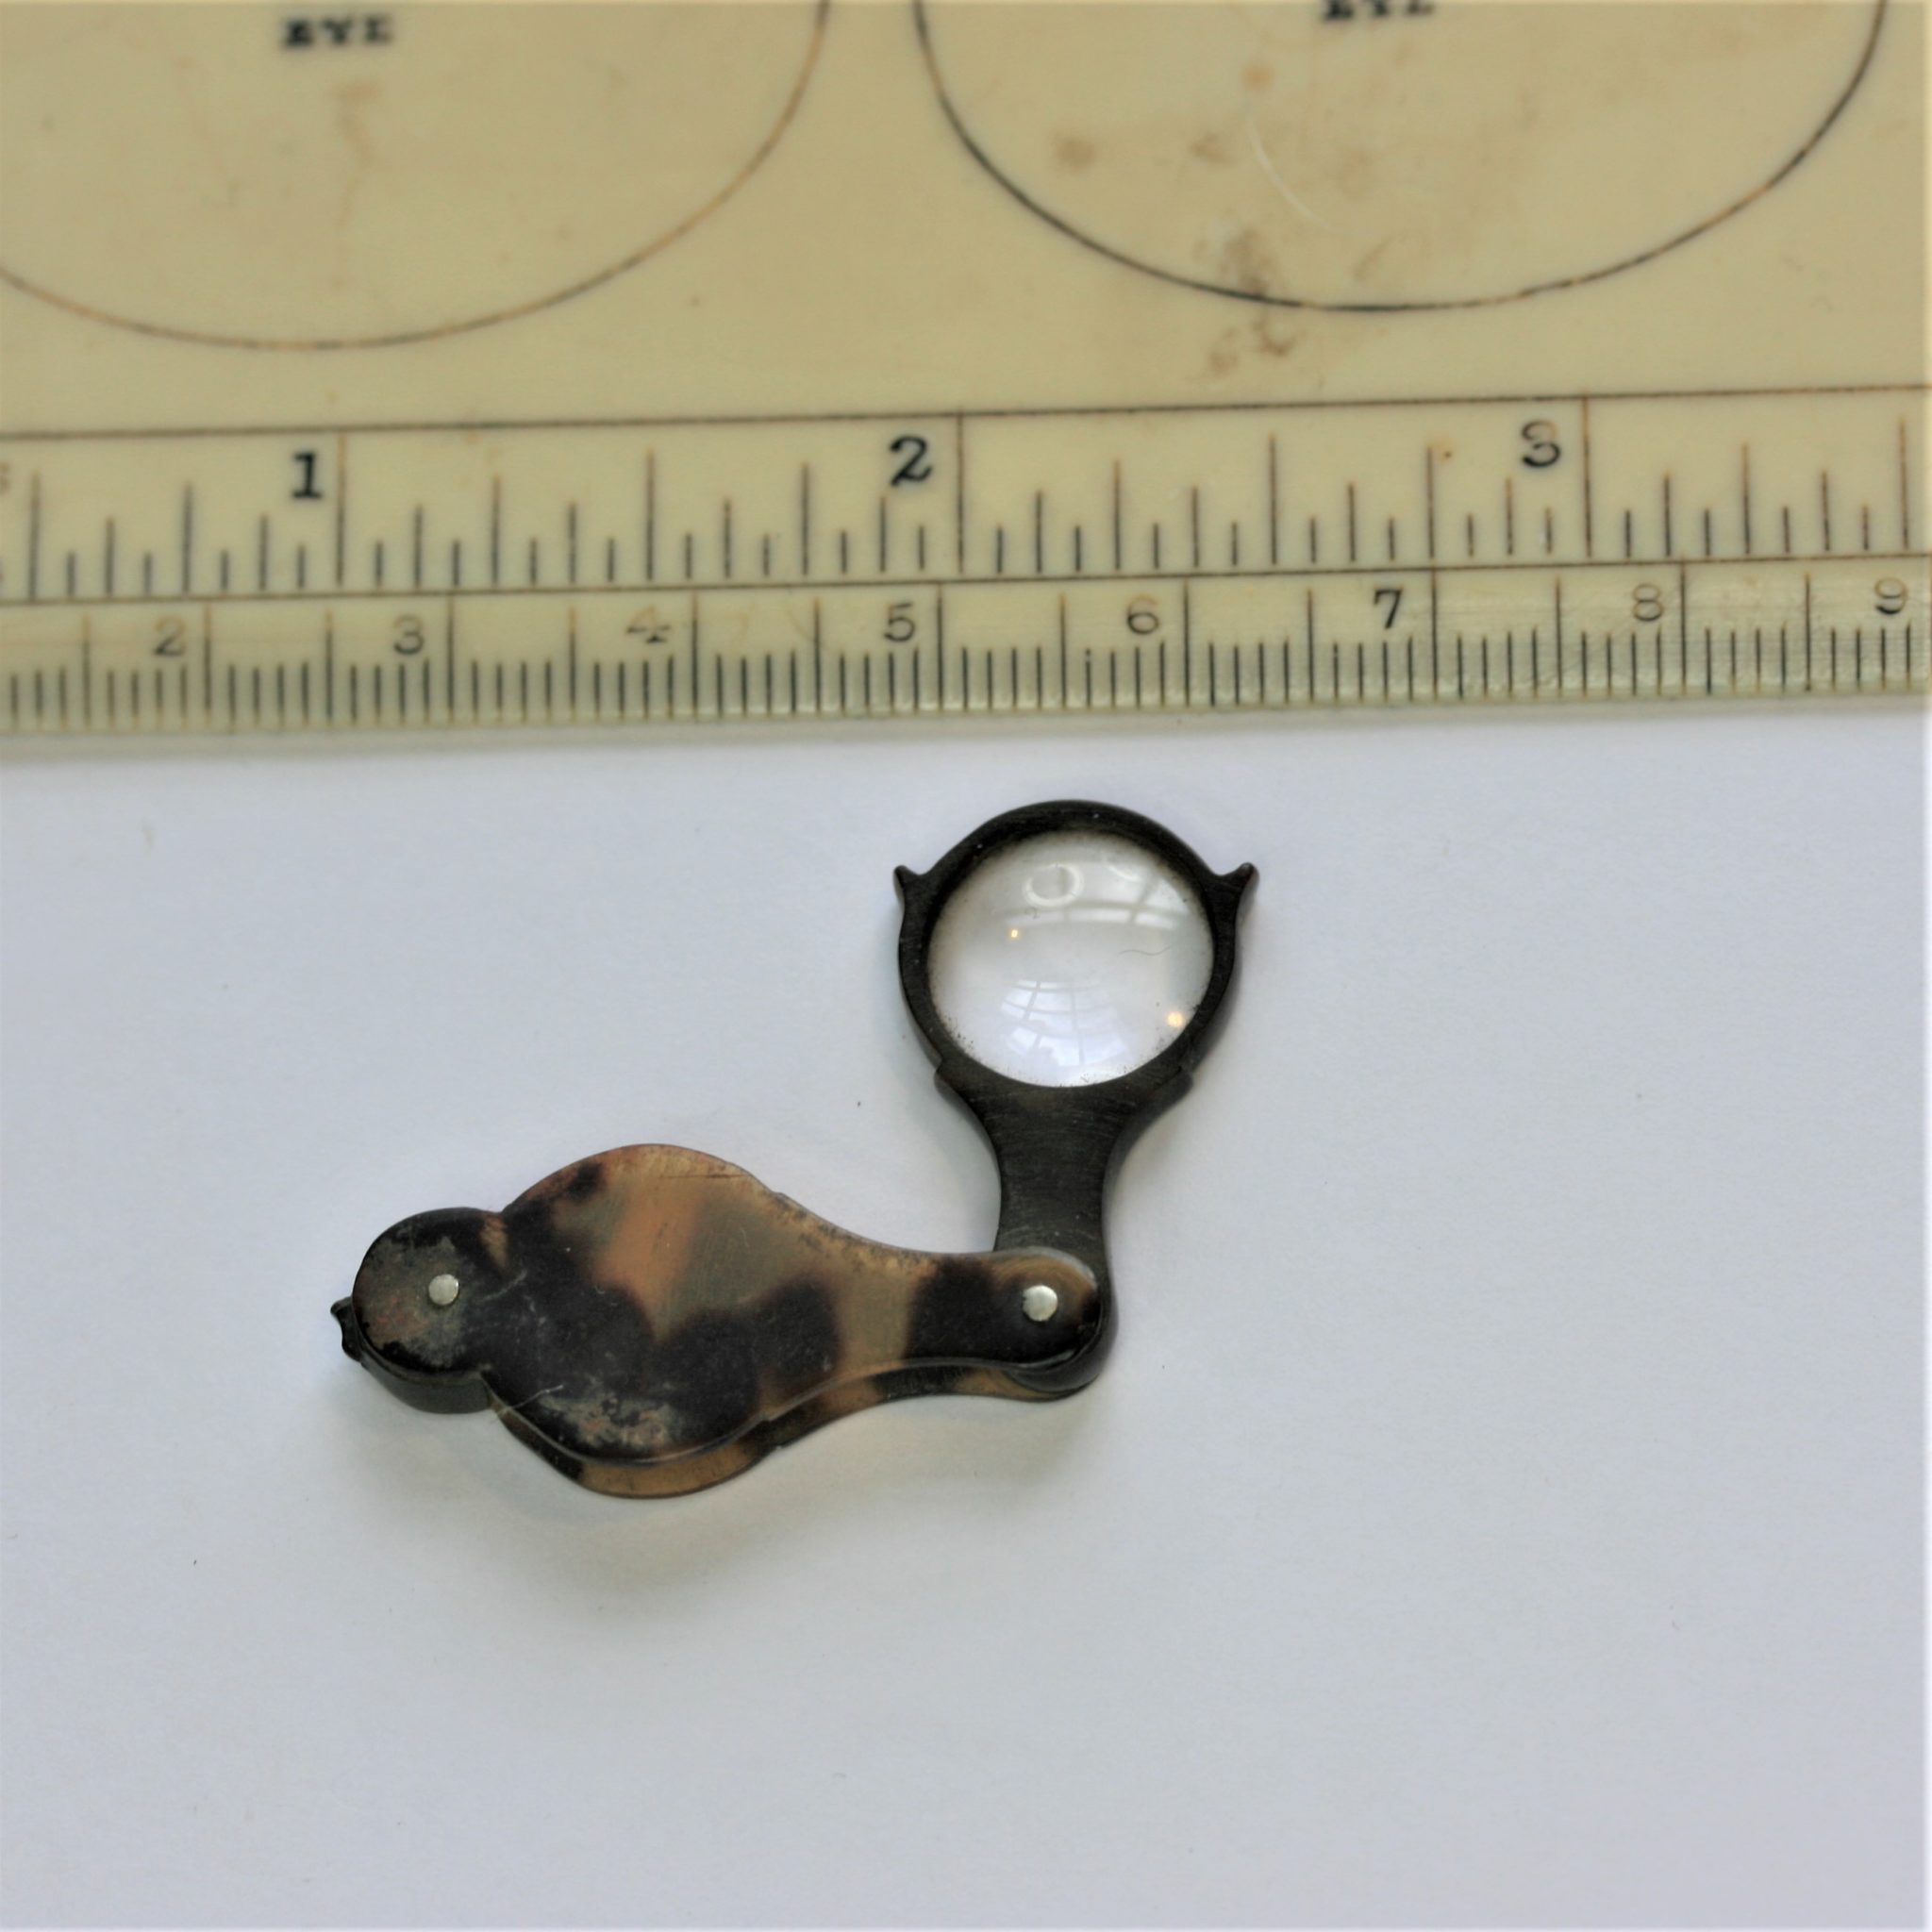 MINIATURE MICROSCOPE MAGNIFYING GLASS , SHELL MOUNT, IMAGE GOOD, JUST OVER 1 IN. LONG, EXCELLENT COND.